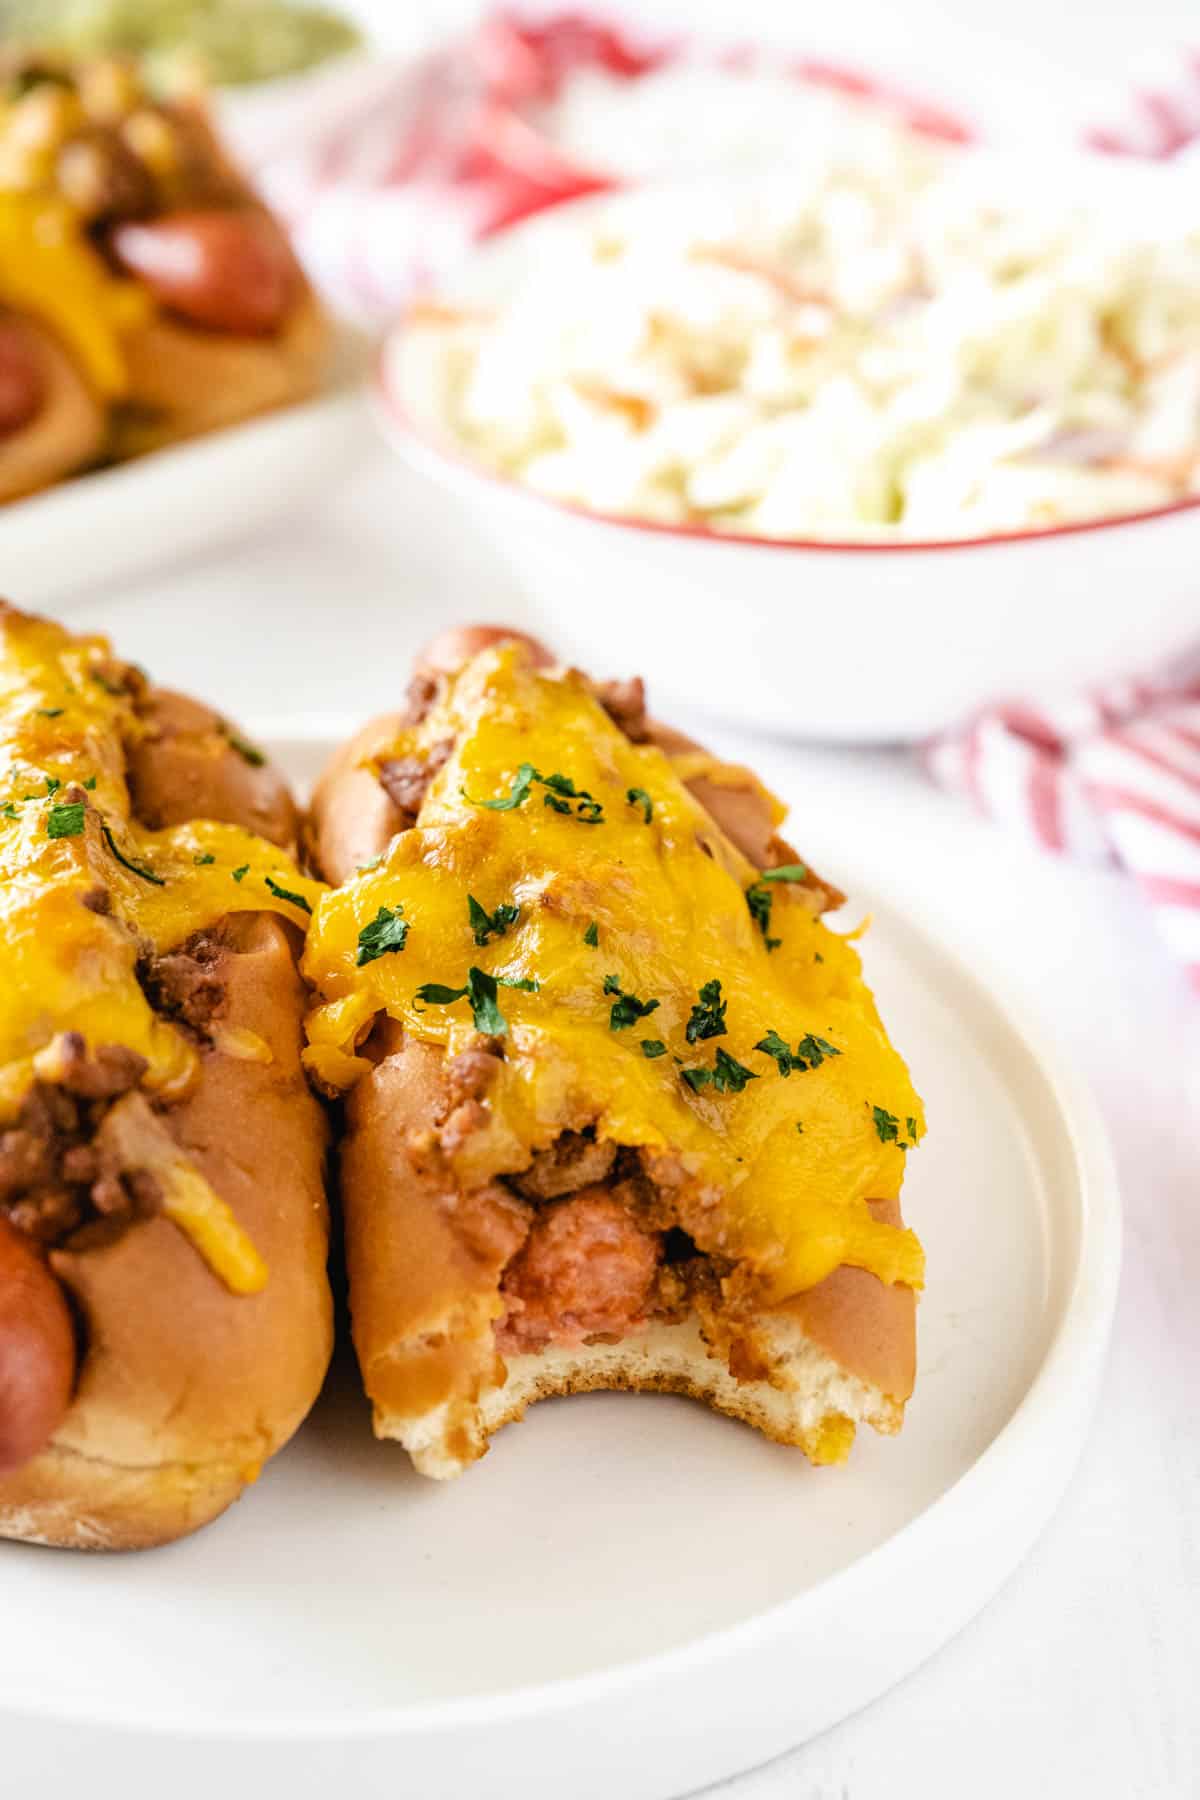 A hot dog topped with chili and cheese set on a white plate with a bite taken from the hot dog.